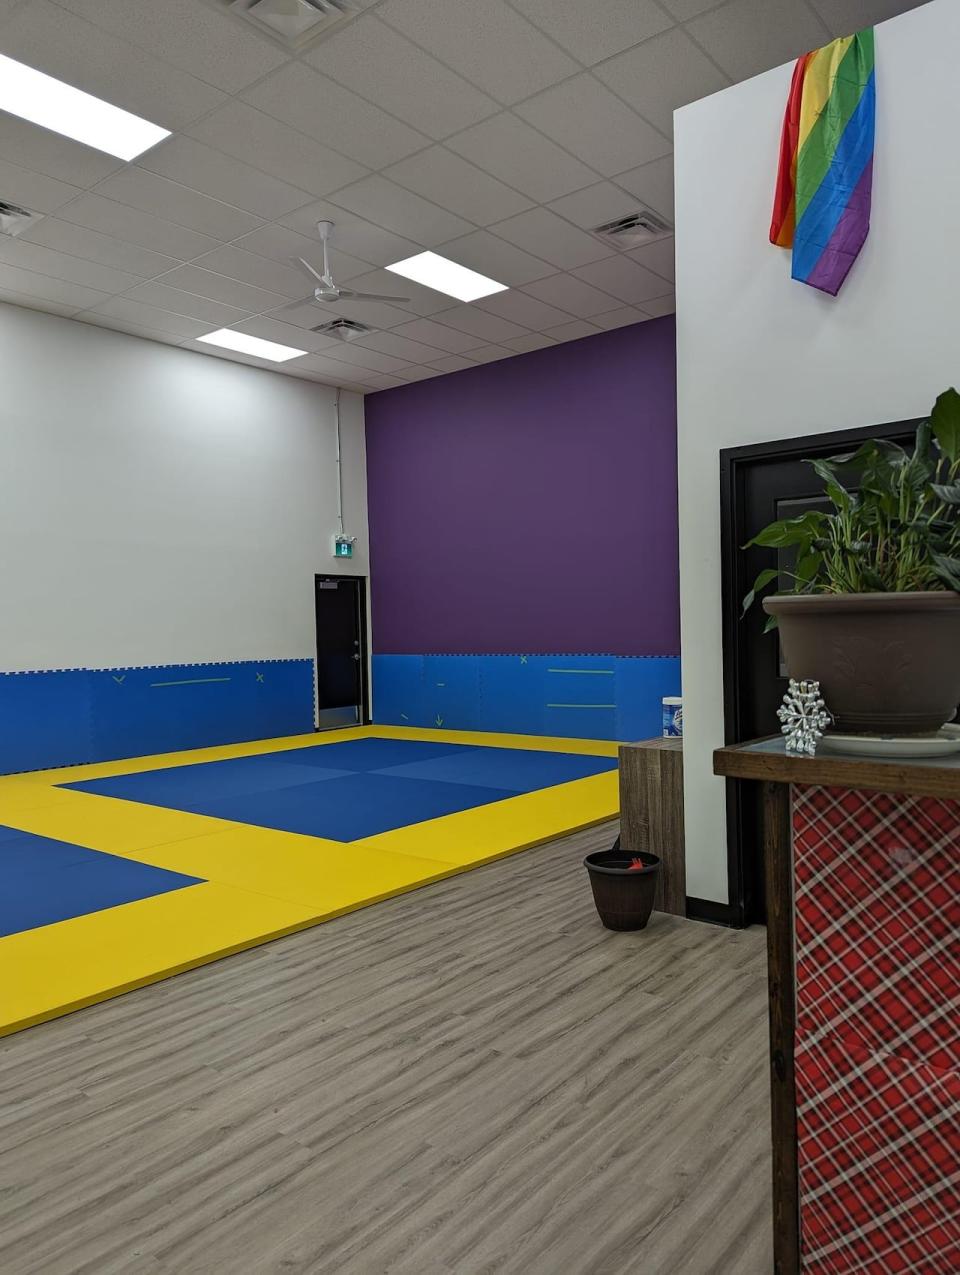 Nicole Sawin says Connection Martial Arts started in her basement a few years ago and is now 50 members strong with a dedicated practice space. 